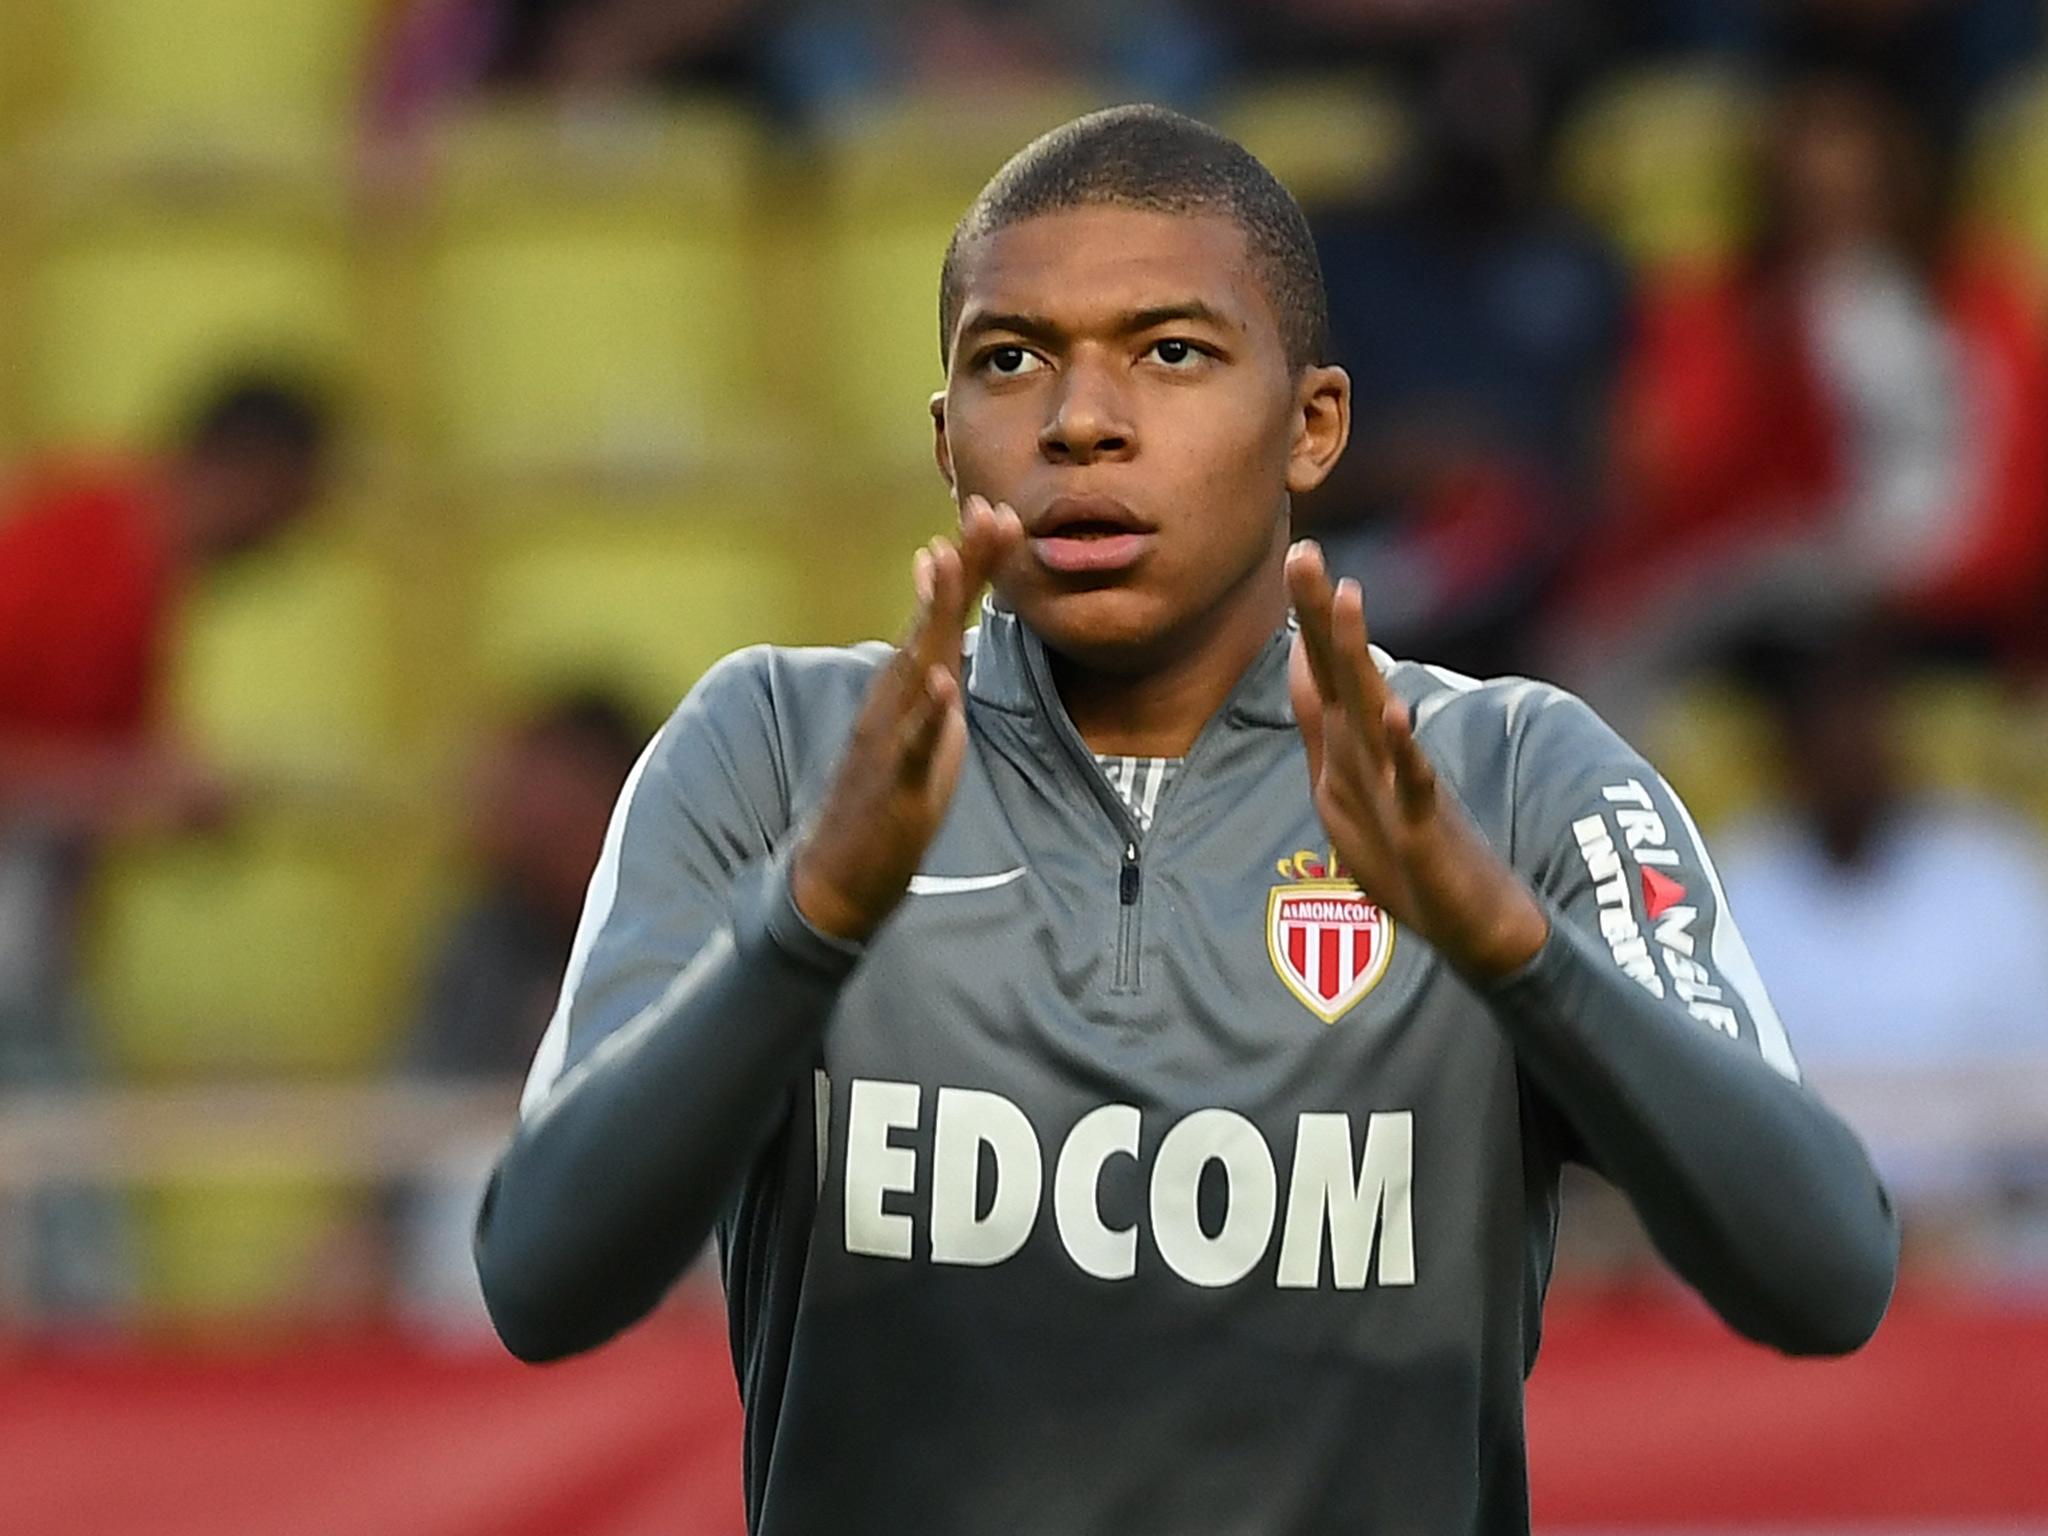 Mbappe could become the world's most expensive player